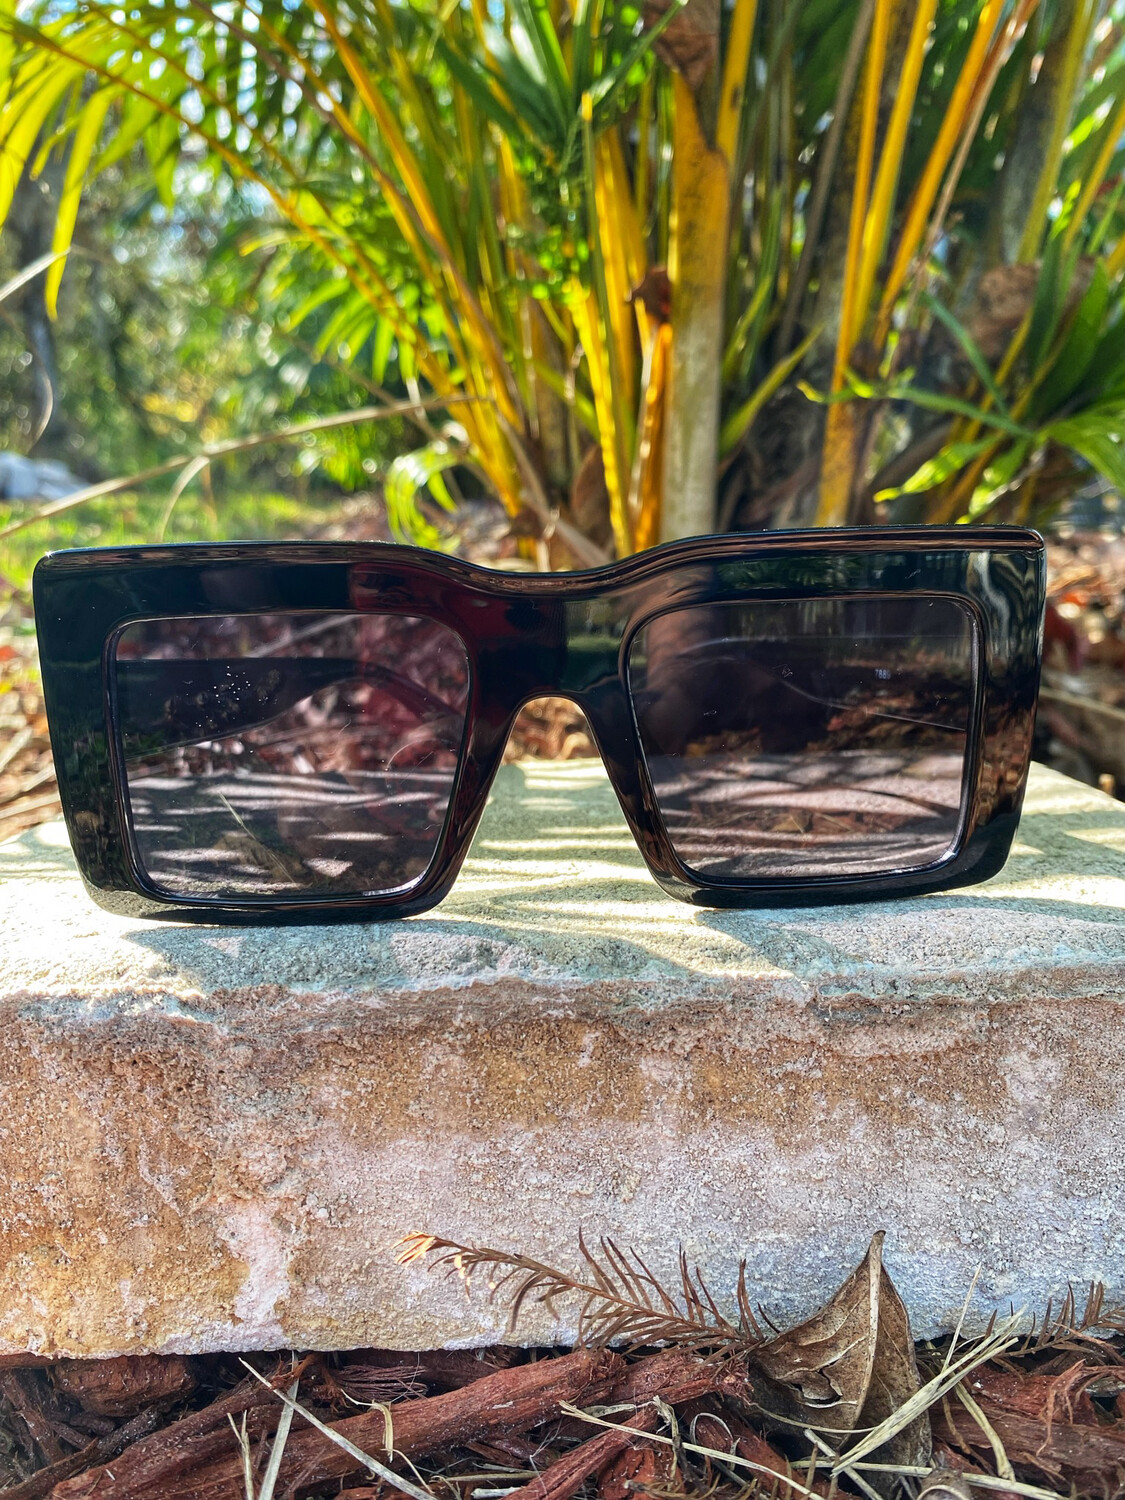 "The Notorious" Rectangular wide frame sunglasses